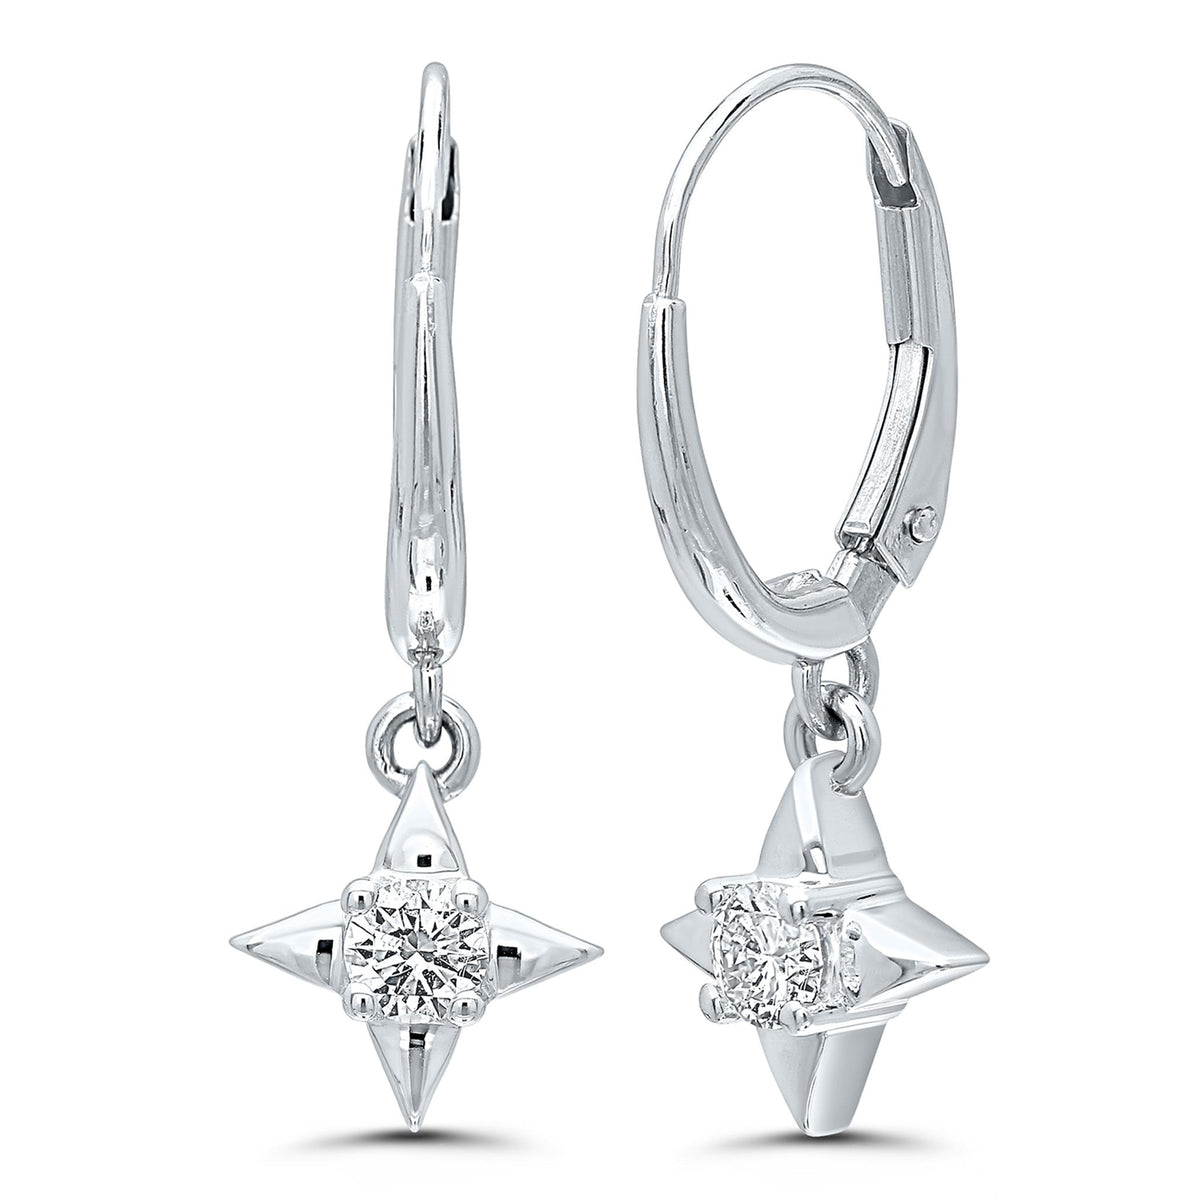 Star Of Hope 14Kt White Gold Lever Back Earrings with.25cttw Natural Diamonds